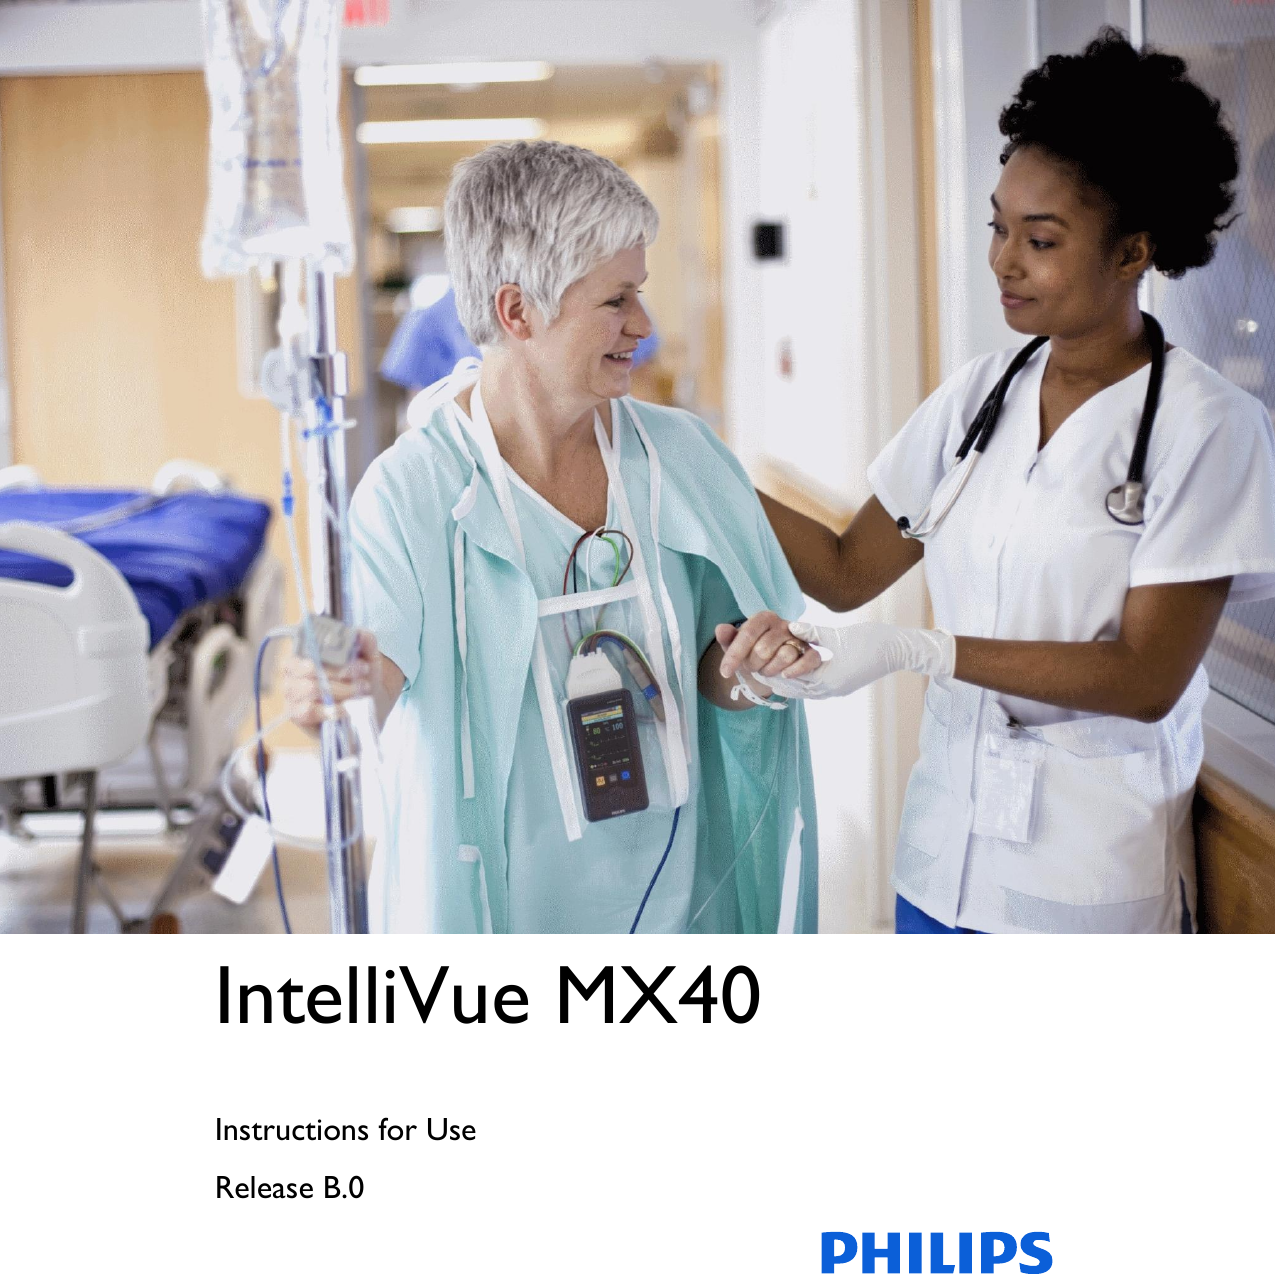  IntelliVue MX40  Instructions for Use               Release B.0      